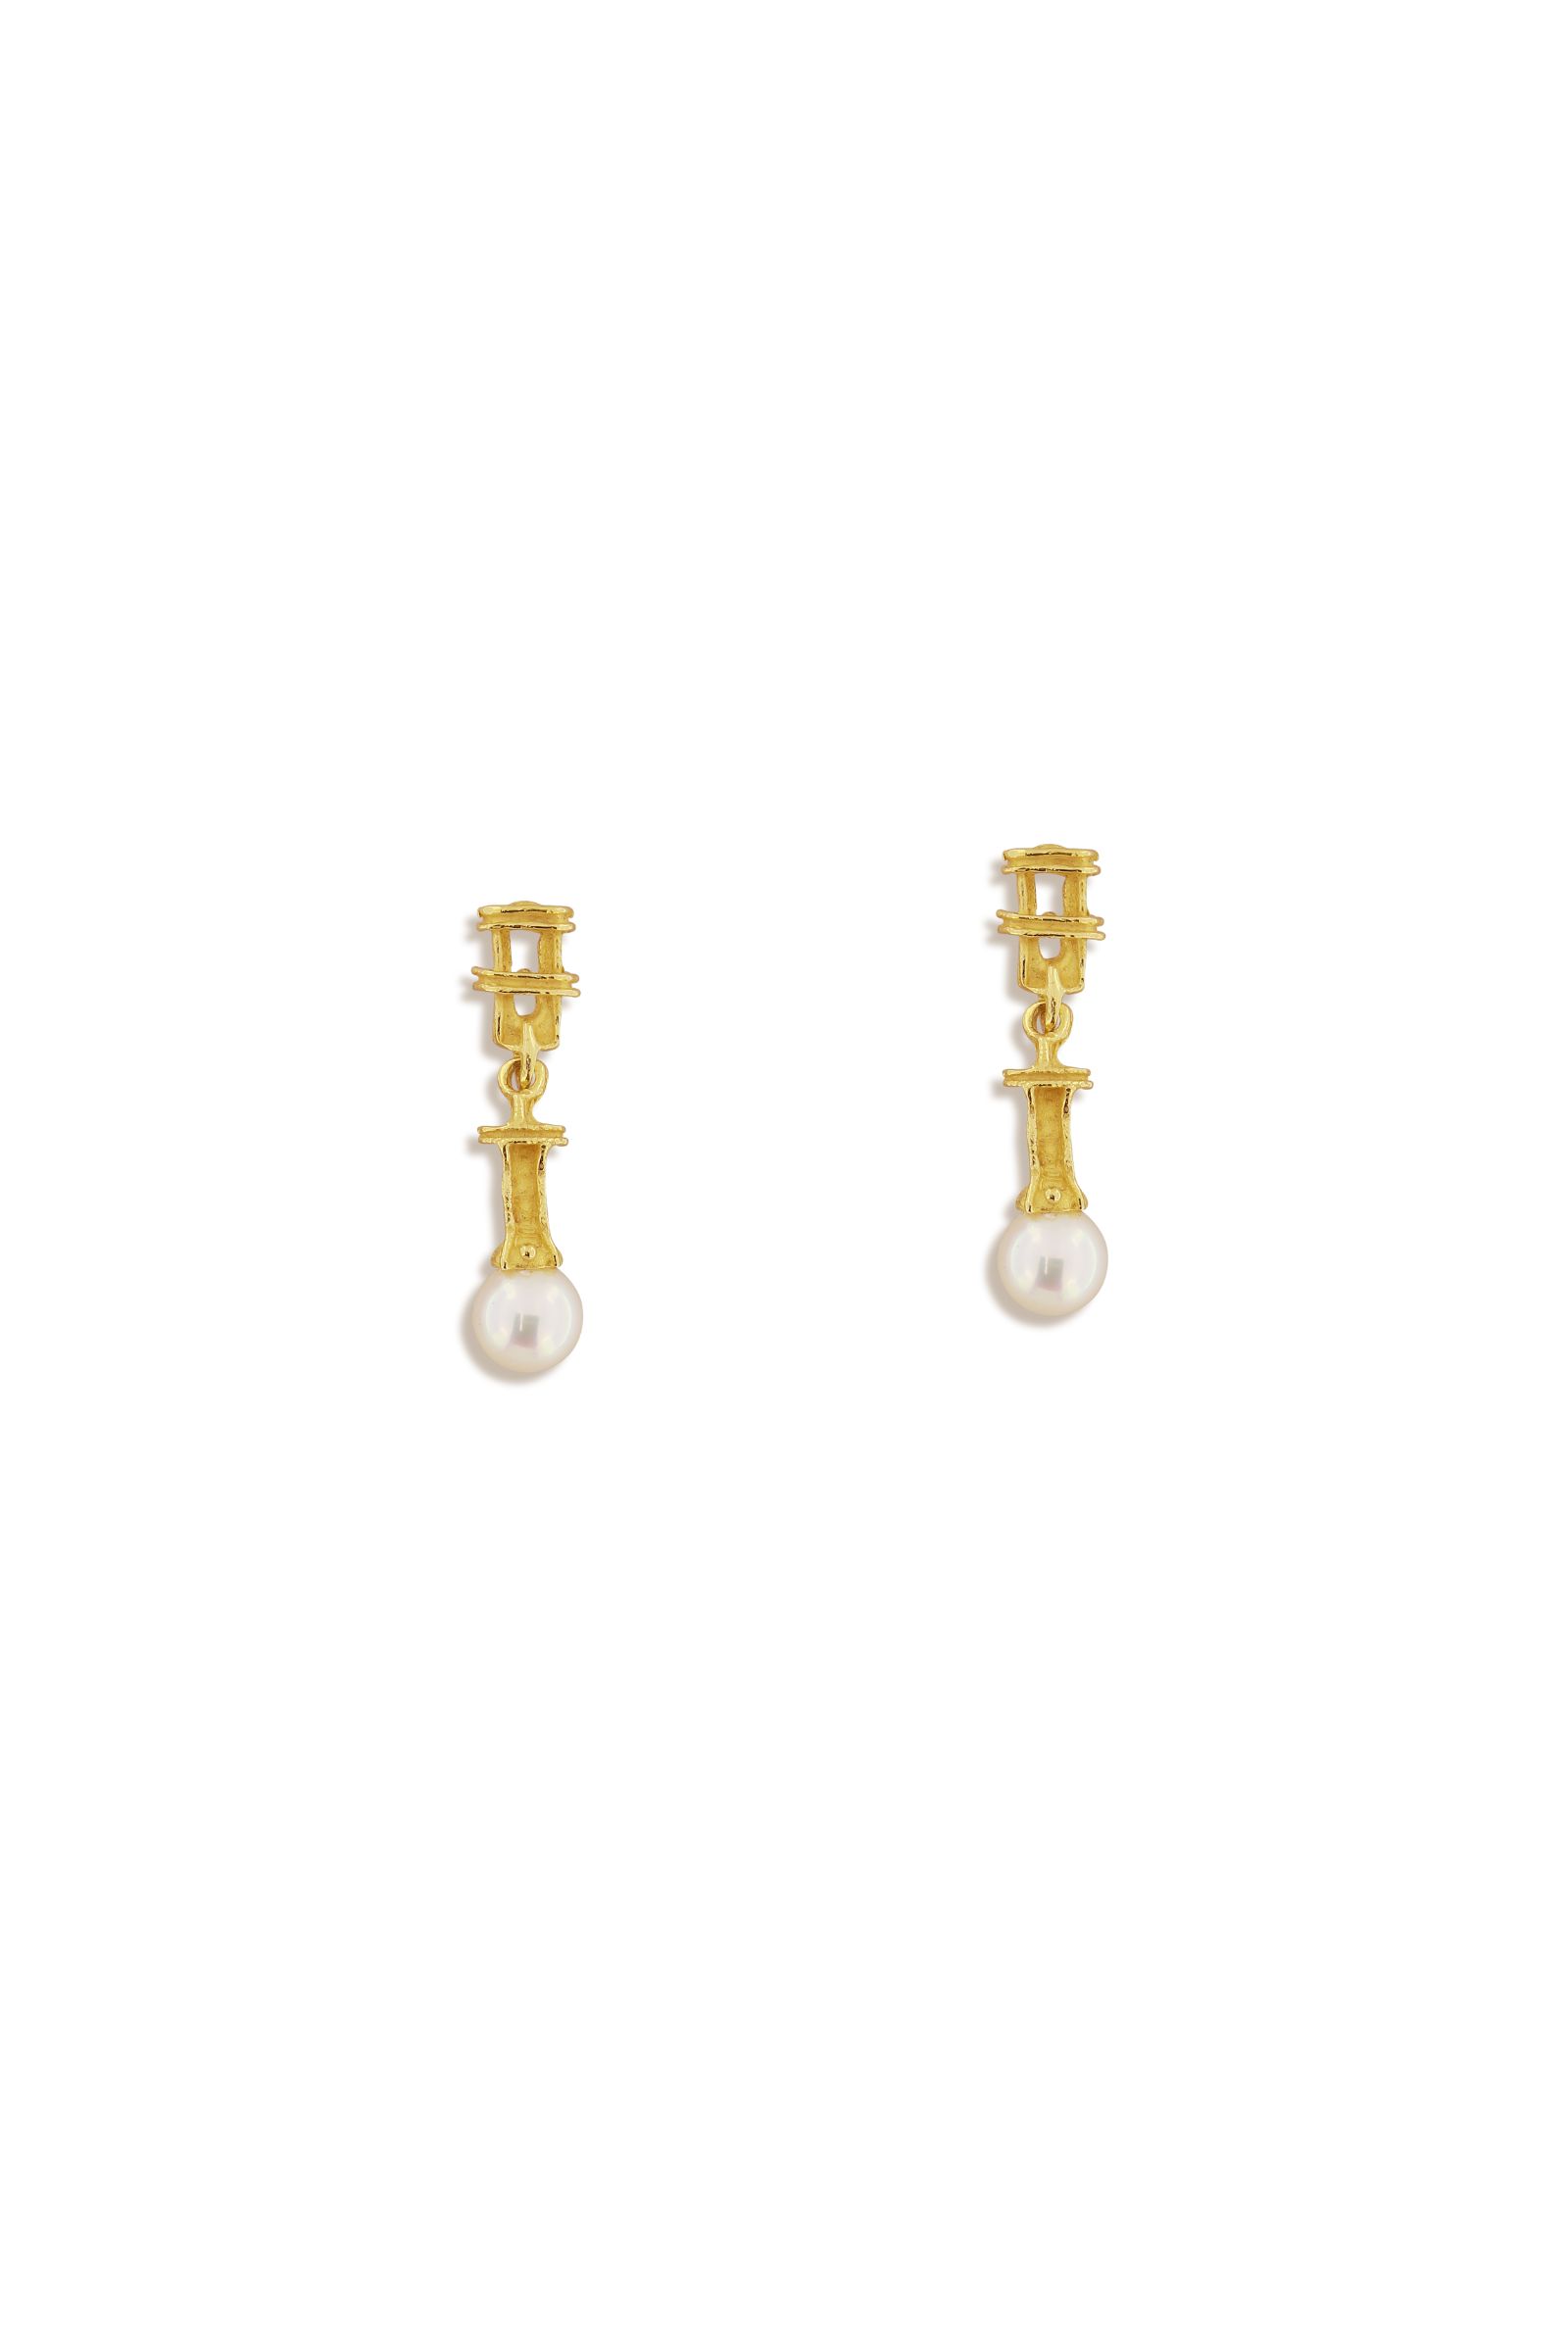 SD54A-18Kt-Yellow-Gold-Pendant-Earrings-with-White-Pearls-1